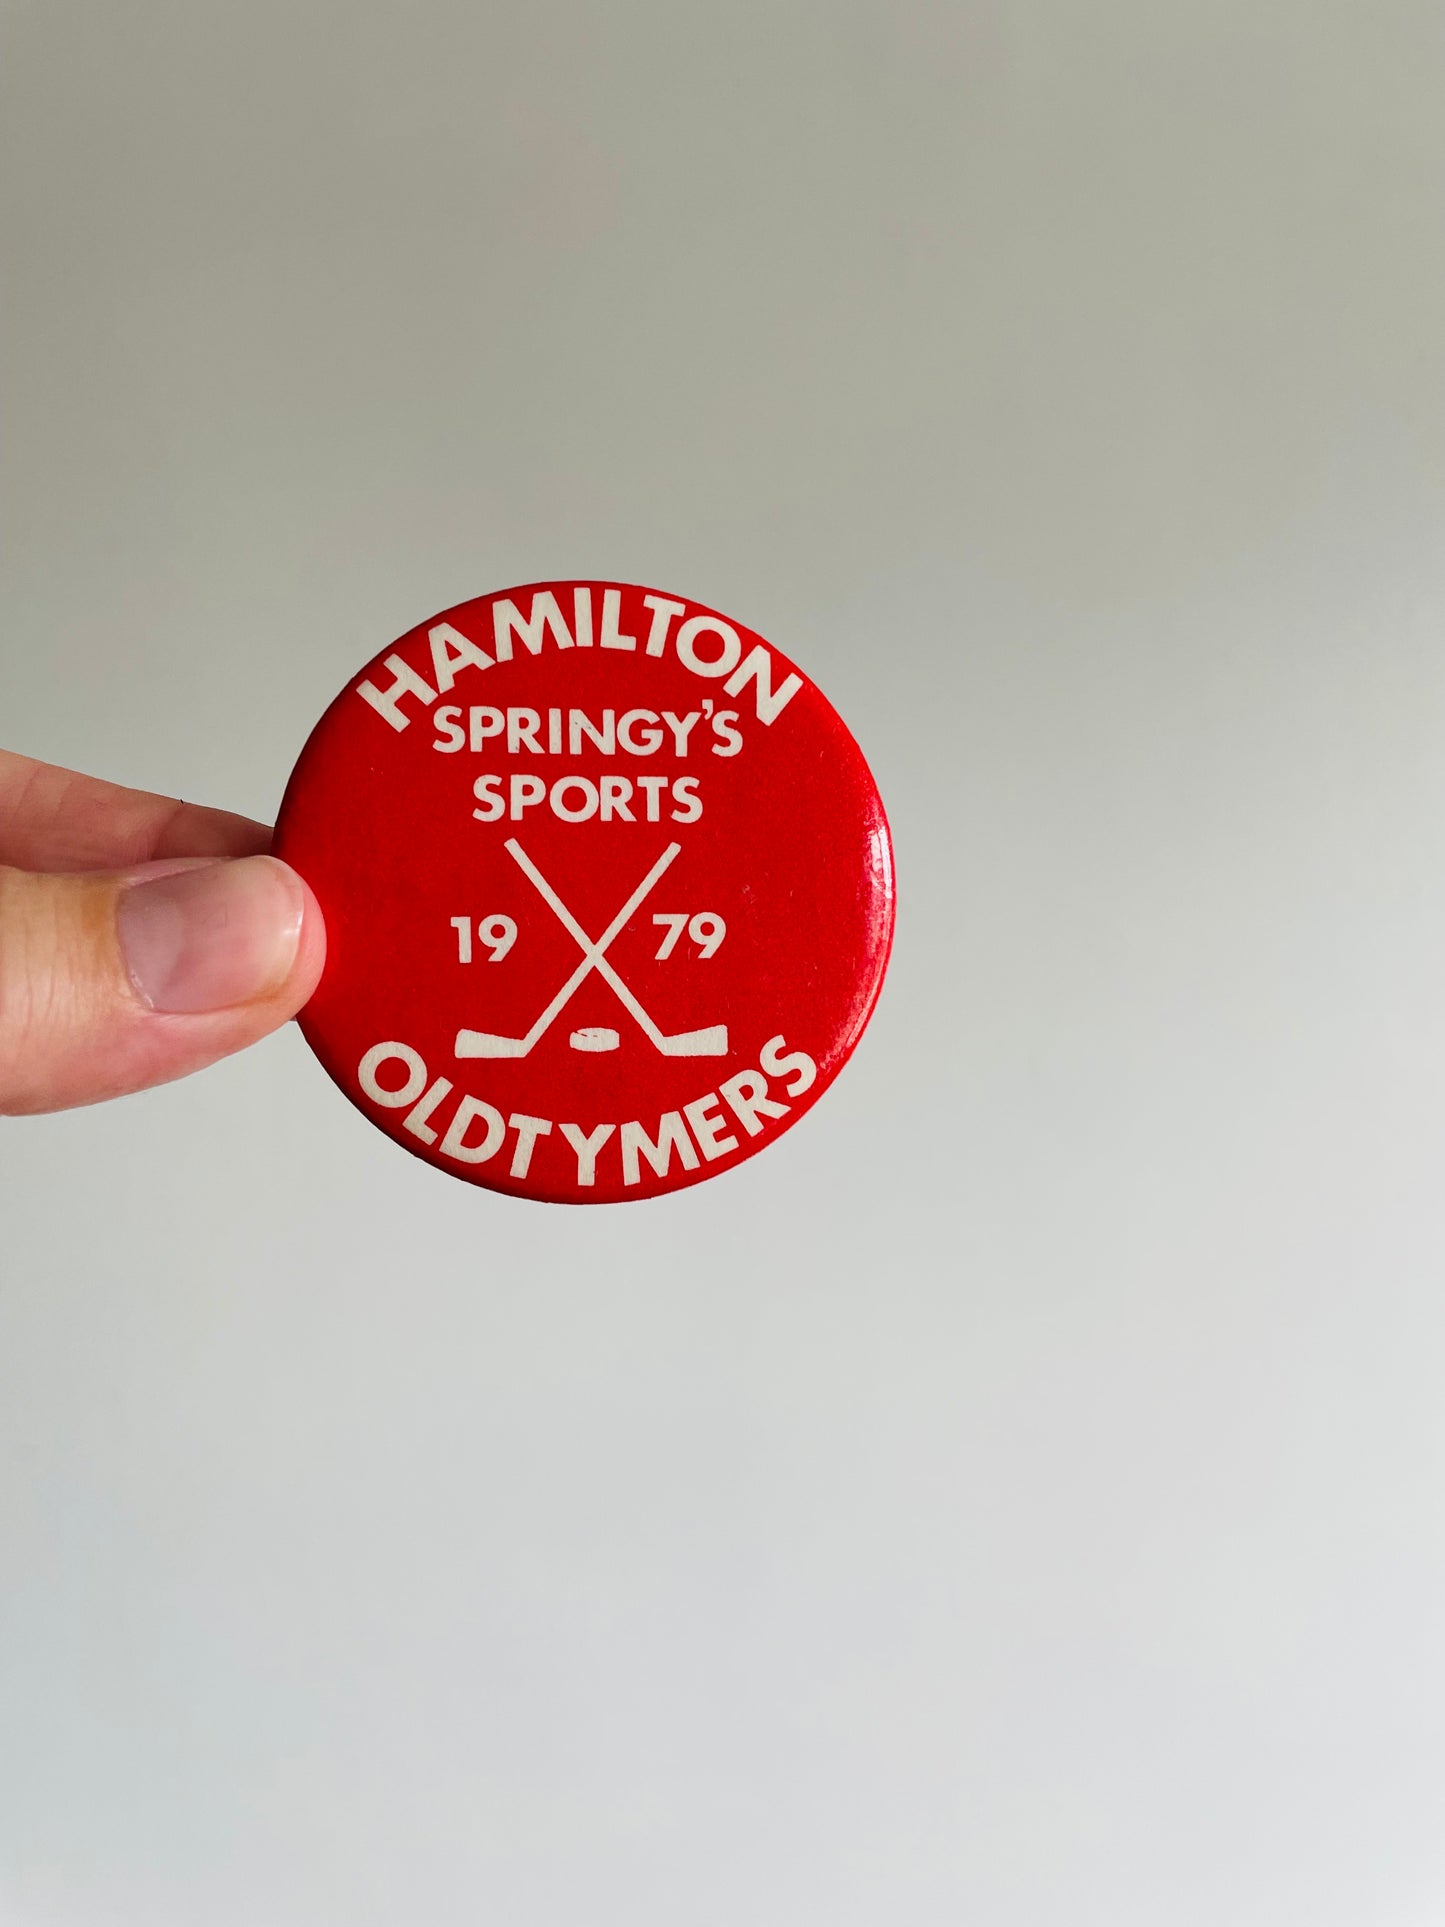 Vintage Metal Hockey Button Pin - Hamilton Oldtymers Springy's Sports 1979 - Red #2